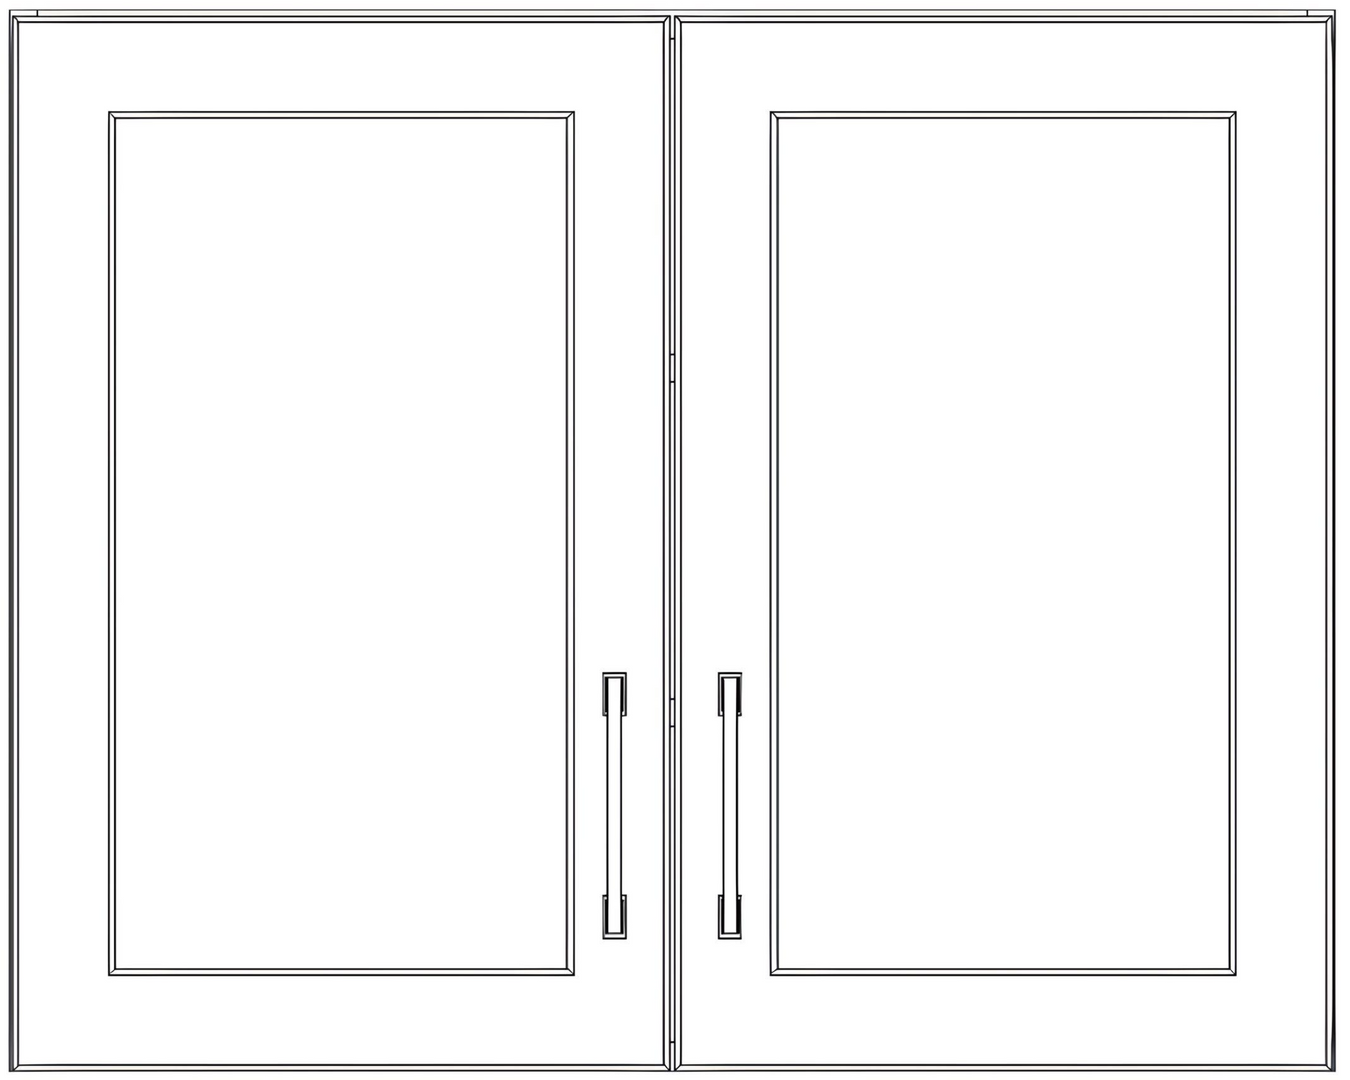 24" High Wall Cabinets - Thermofoil Doors